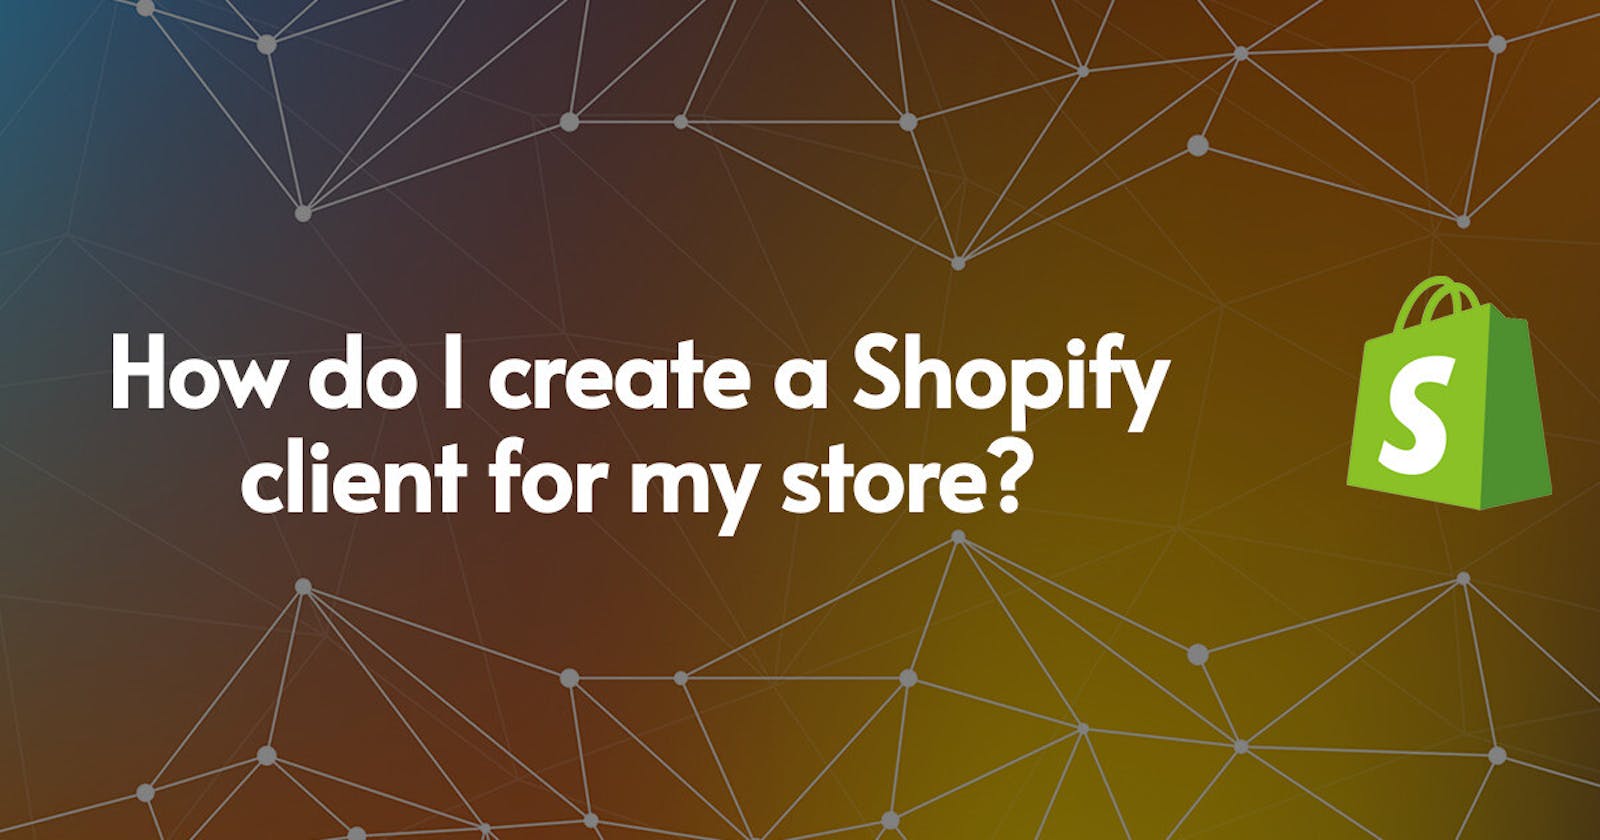 How do I create a Shopify client for my store?